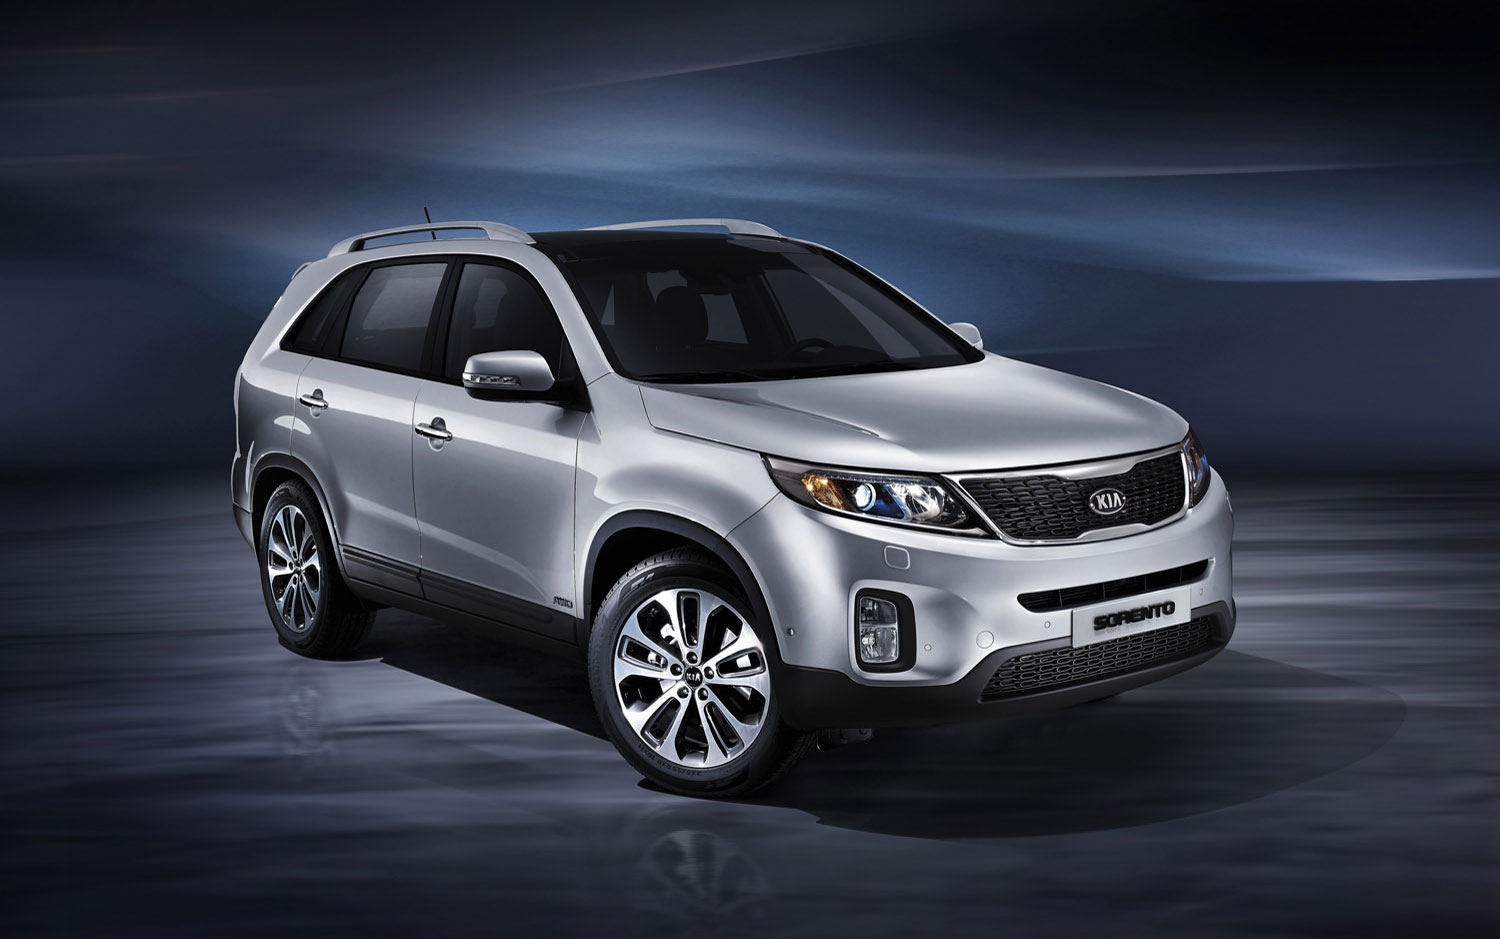 Cars Model 2013 2014: Refreshed 2014 Kia Sorento is Ready for Crossover ...